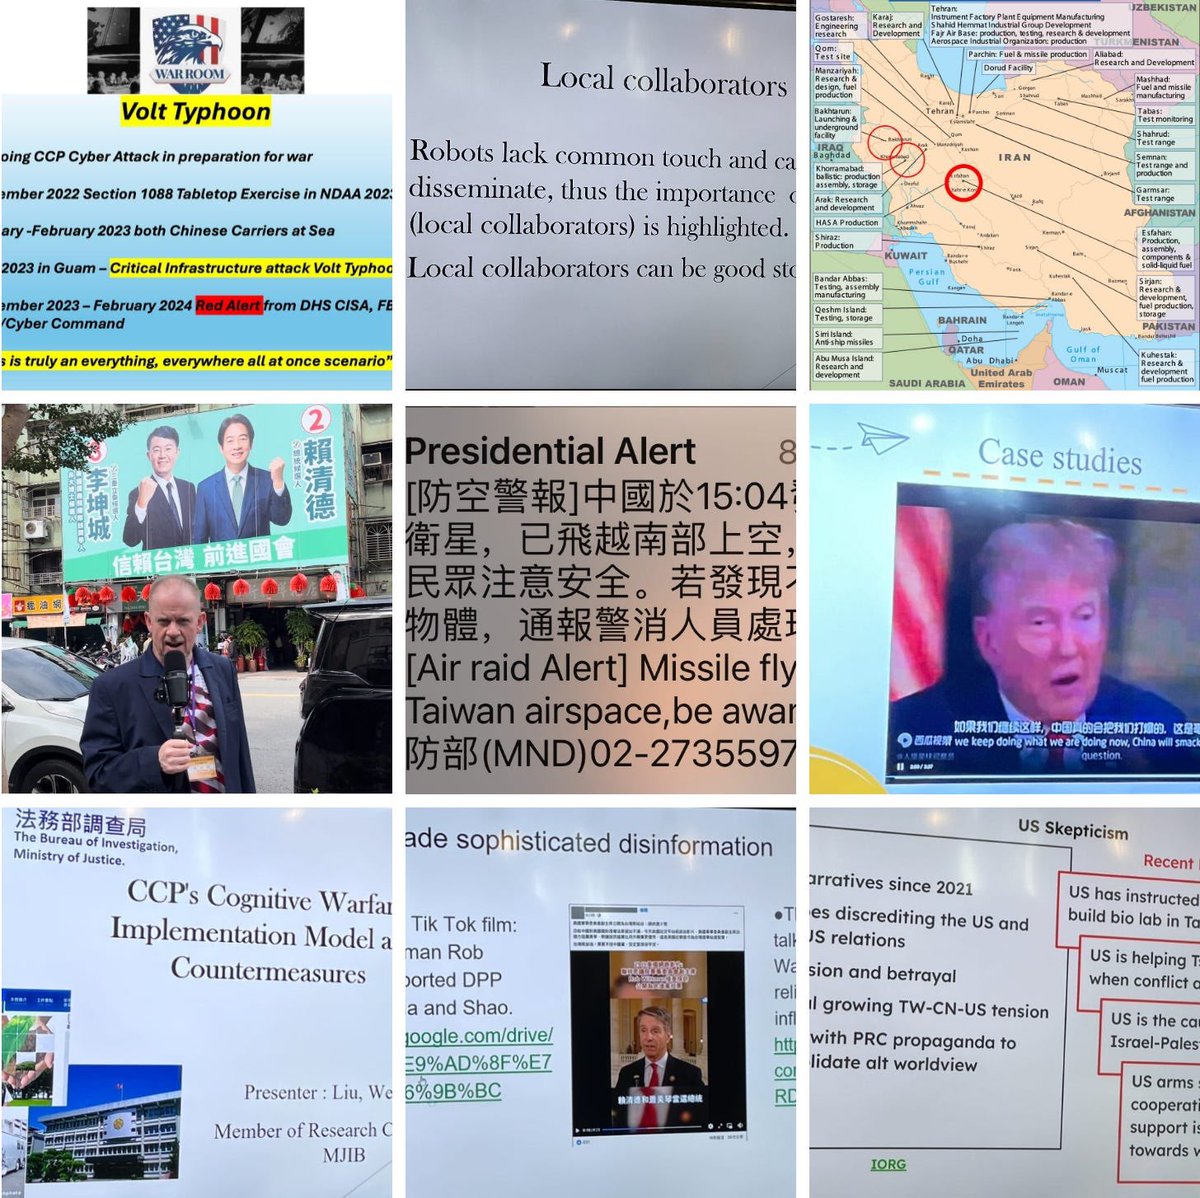 Volt Typhoon and Taiwan Election Slides from Warroom Las Vegas and Friday's show A full throated Chinese Cyber Attack is in progress —Colonel (Retired) John Mills Publicly announced in May 2023, the Chinese are pre-planting malware en masse to disrupt and disable our critical